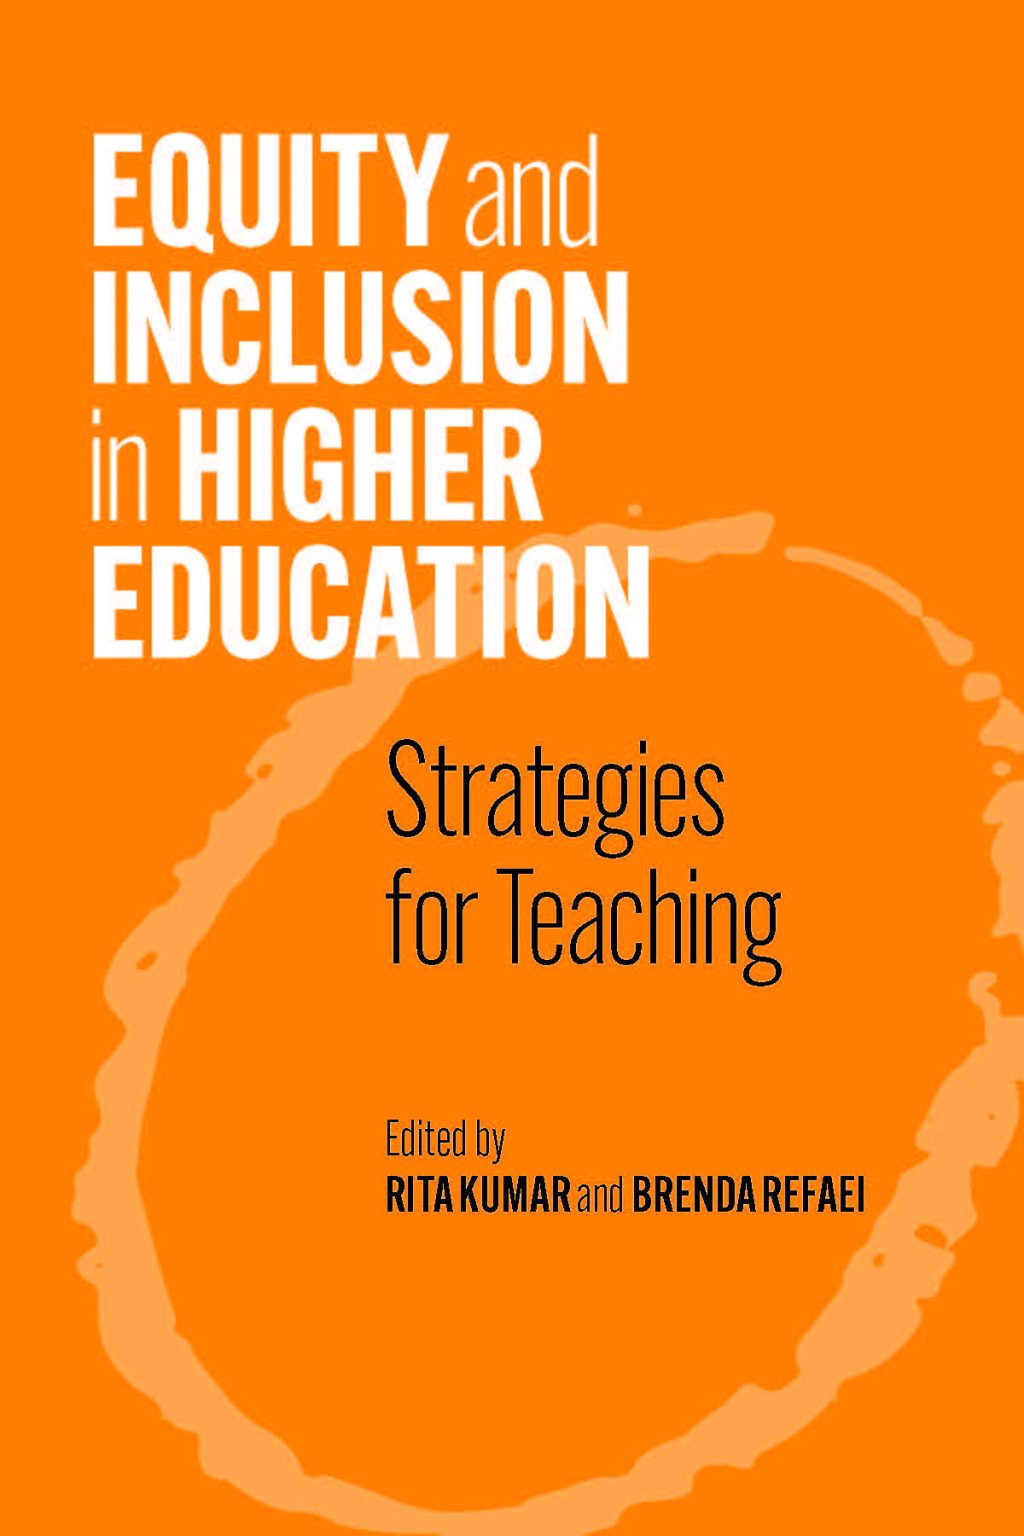 book cover for equity and inclusion in higher education